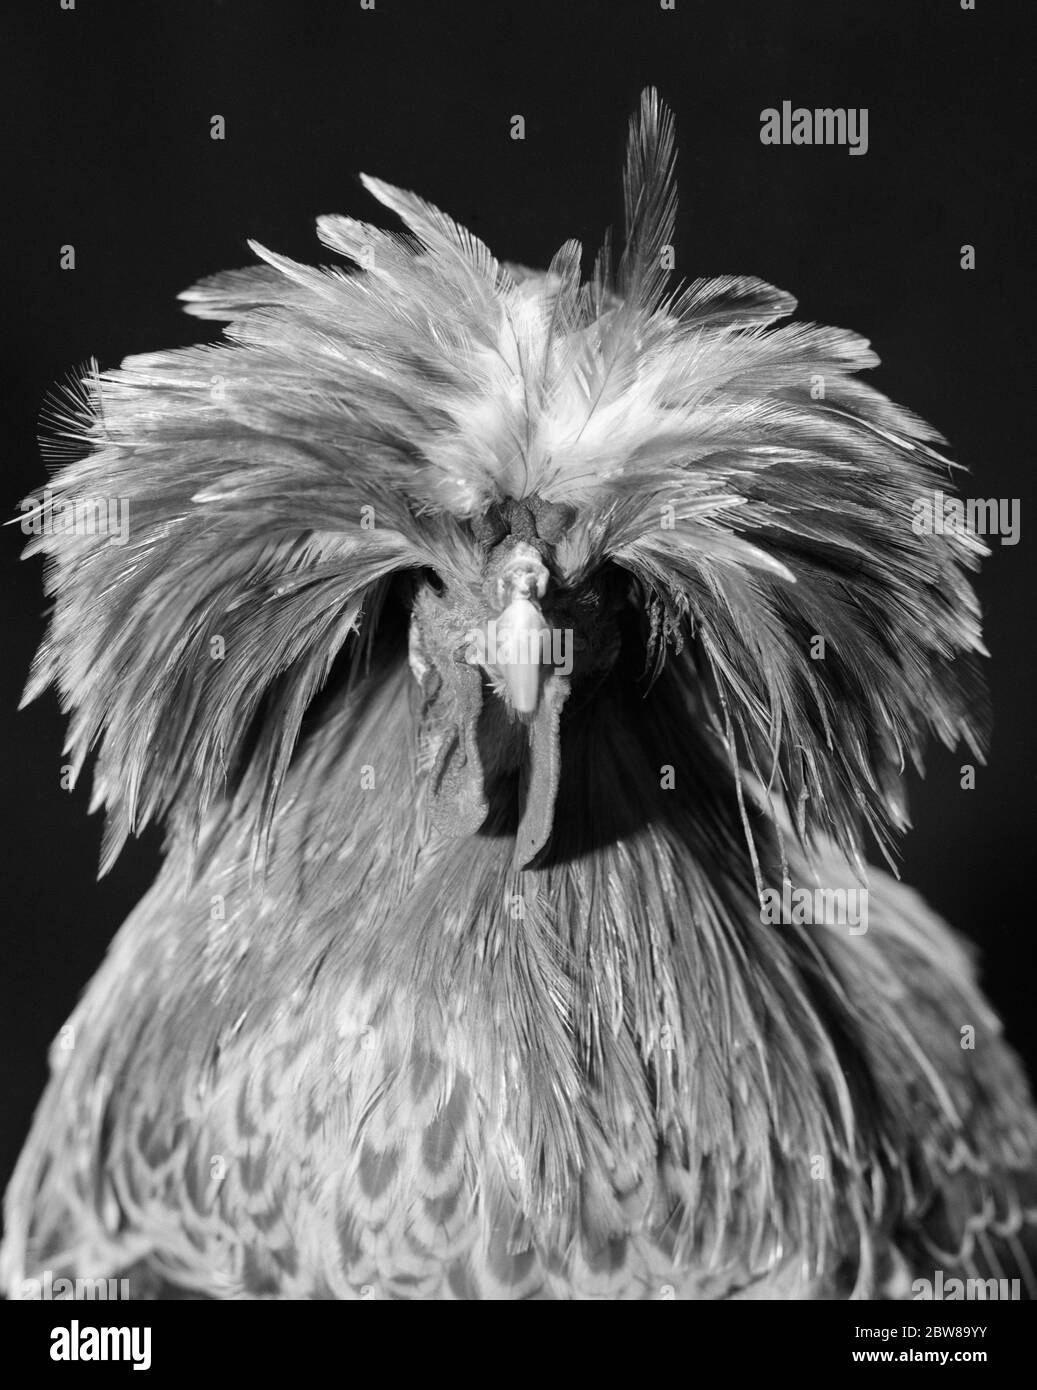 1950s 1960s CLOSE-UP OF PLAIN BUFF LACED POLISH CHICKEN WITH LONG DROOPING PLUME- LIKE FEATHERS ON HEAD LOOKING AT CAMERA - p1088 HEL001 HARS AMUSING ECCENTRIC LACED POULTRY BLACK AND WHITE ERRATIC EXOTIC OLD FASHIONED OUTRAGEOUS PLUMAGE Stock Photo